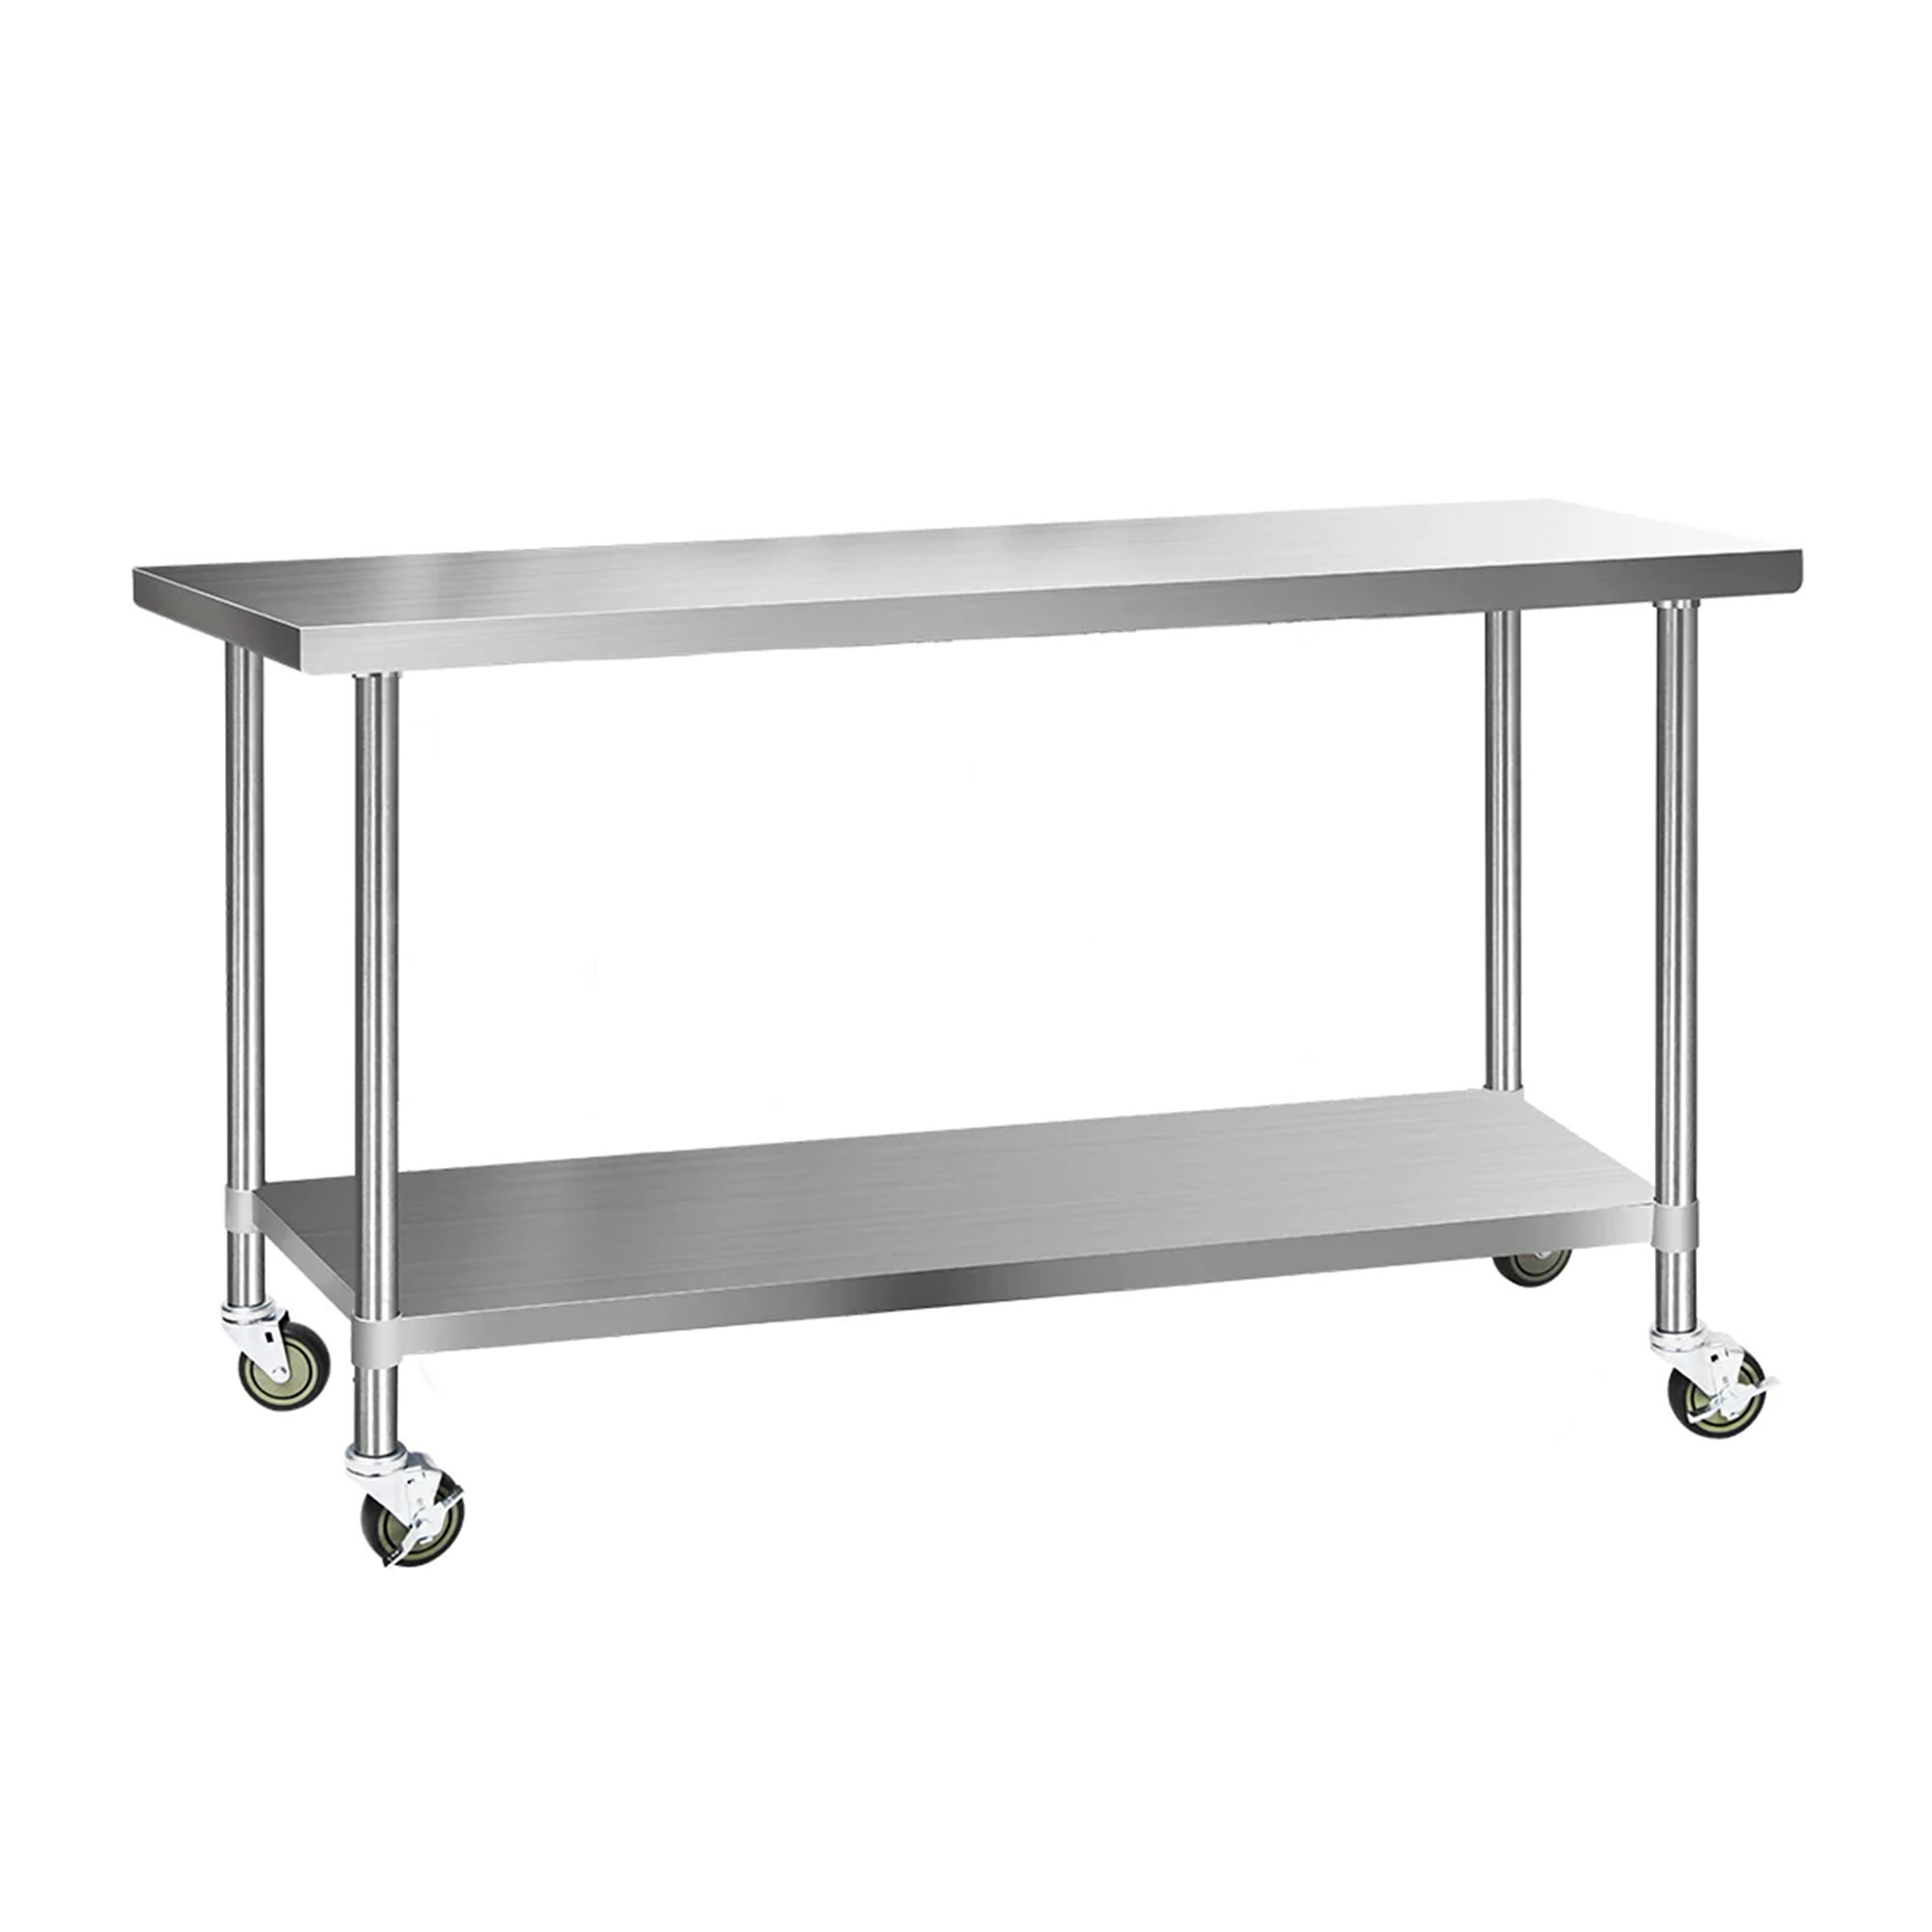 Cefito 430 Stainless Steel Kitchen Bench with Wheels 182.9x61cm Image 1